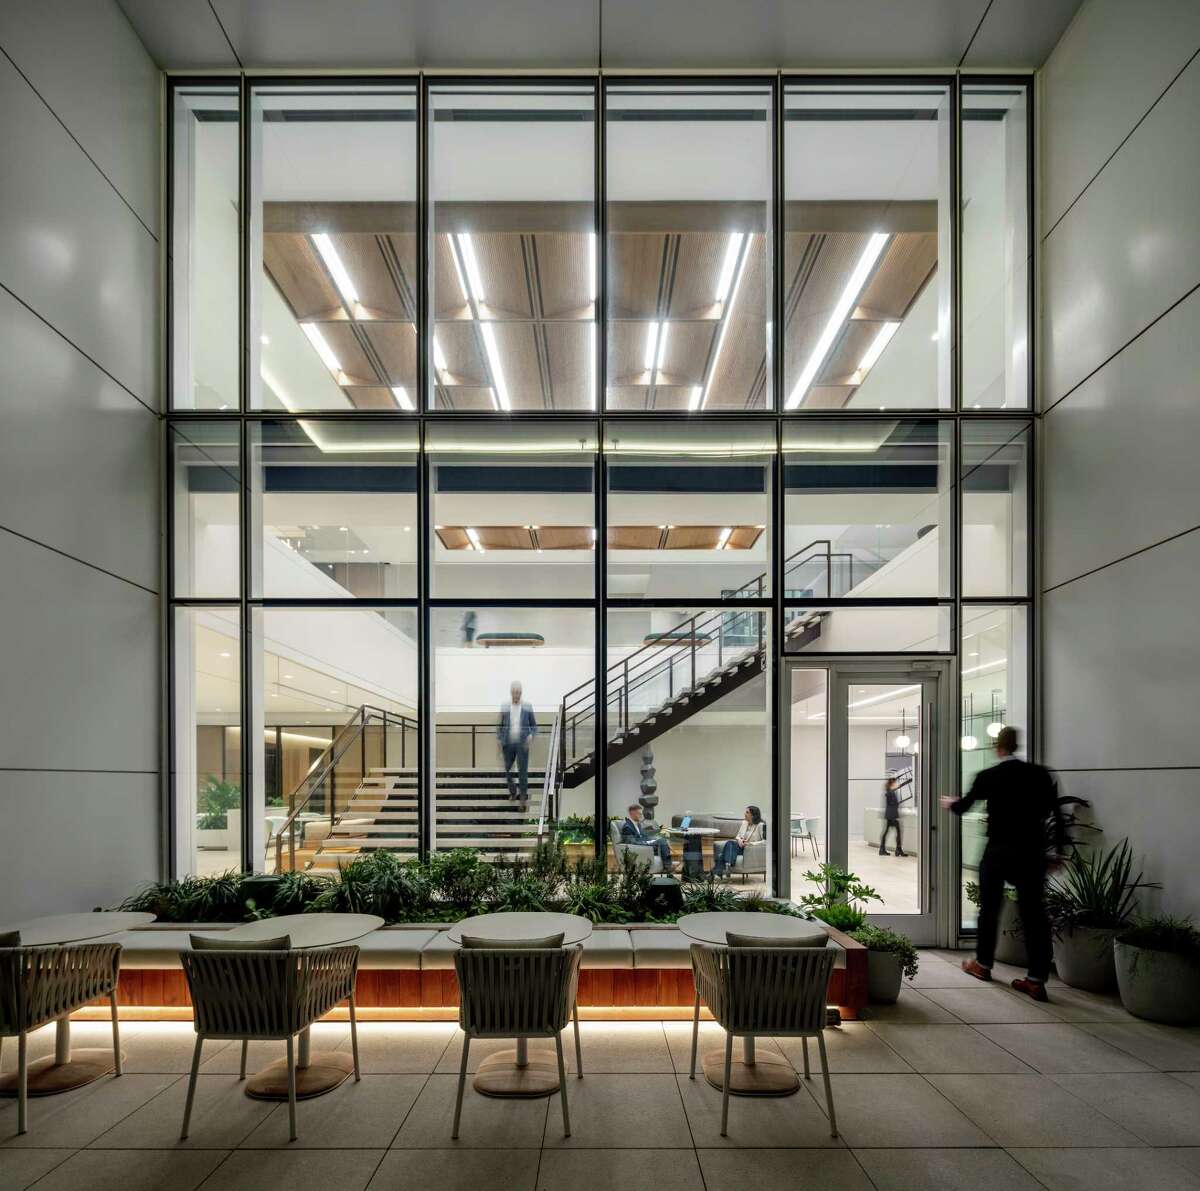 Outdoor balconies also factor into the Hines space in Texas Tower.